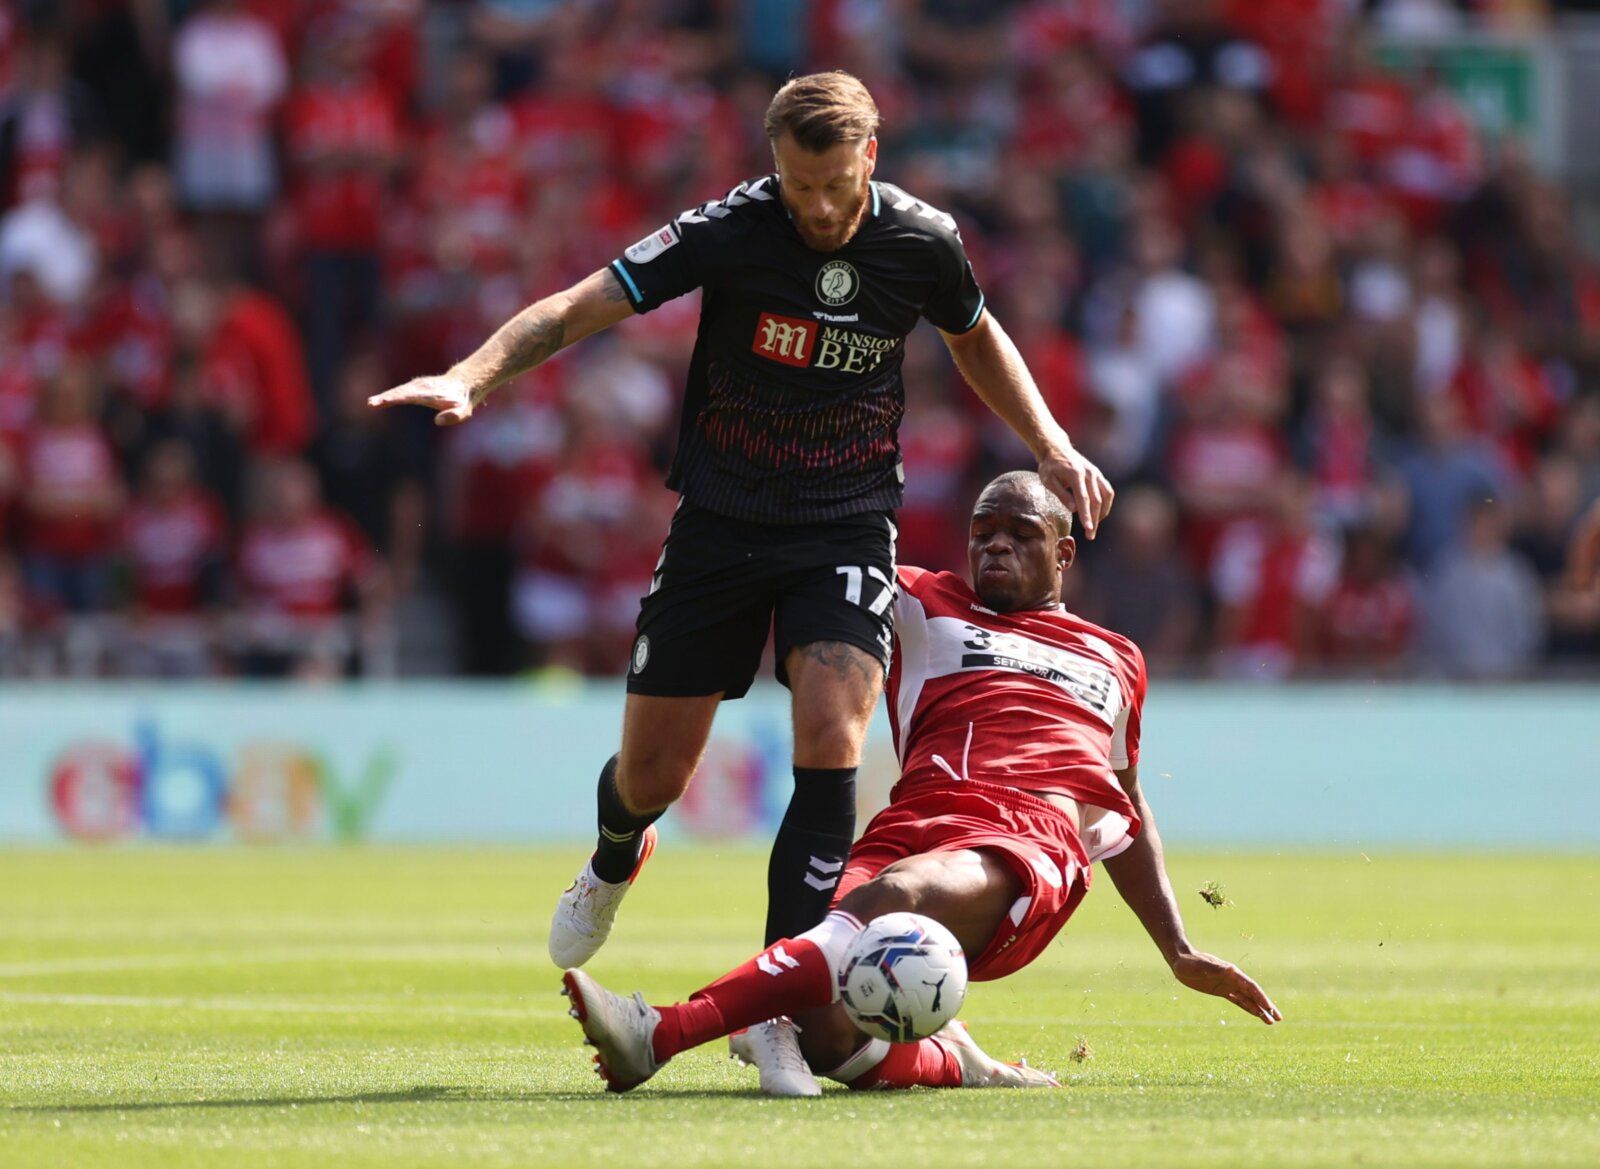 Soccer Football - Championship - Middlesbrough v Bristol City - Riverside Stadium, Middlesbrough, Britain - August 14, 2021 Middlesbrough's Uche Ikpeazu in action with Bristol City's Nathan Baker Action Images/Lee Smith EDITORIAL USE ONLY. No use with unauthorized audio, video, data, fixture lists, club/league logos or 'live' services. Online in-match use limited to 75 images, no video emulation. No use in betting, games or single club /league/player publications.  Please contact your account re